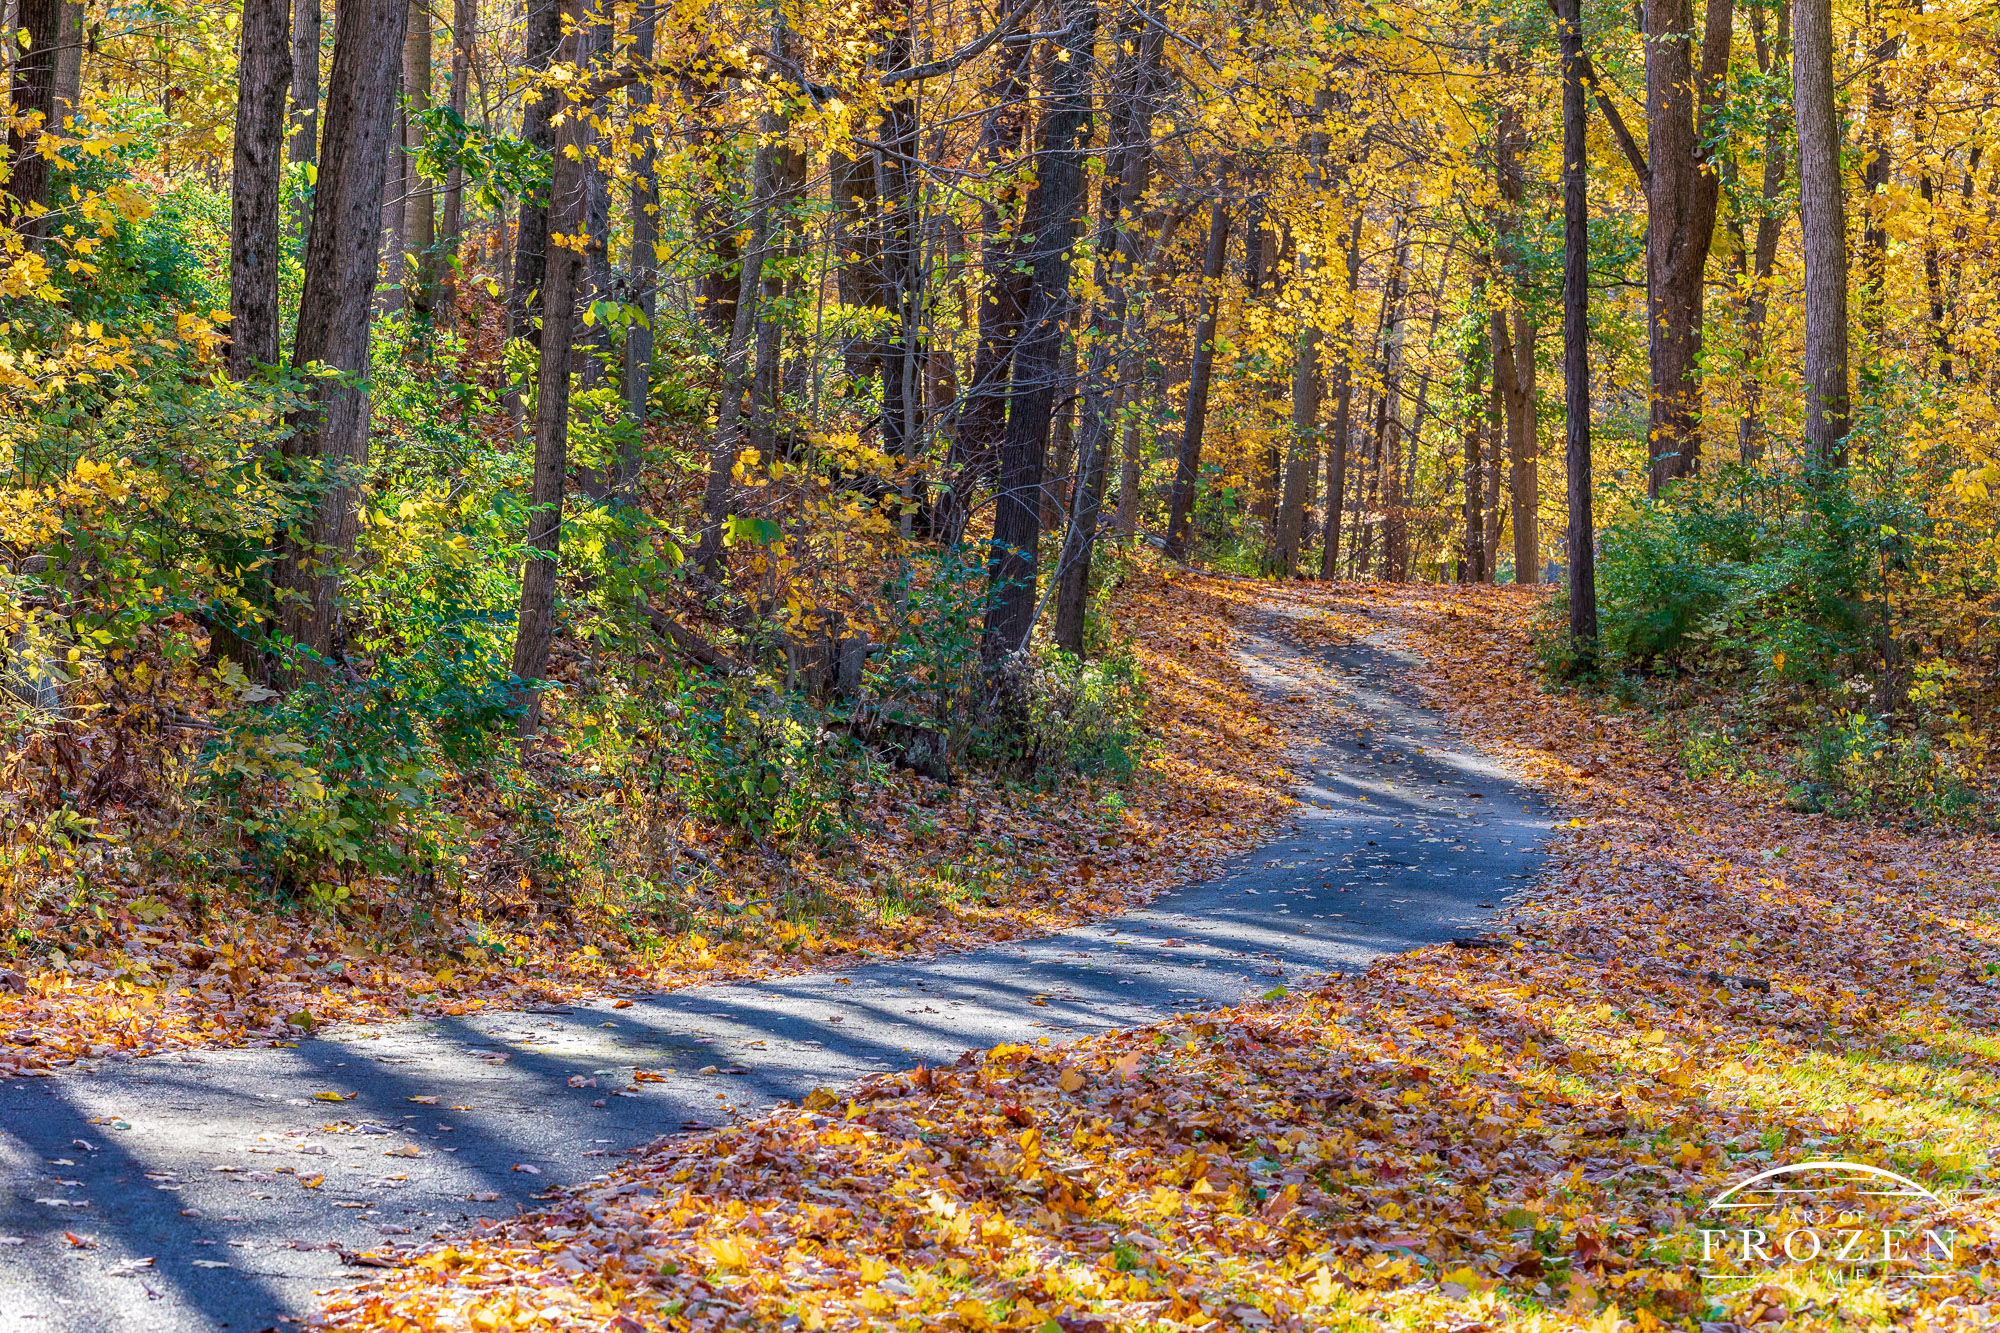 A winding path in Tawawa Park, Sidney Ohio, leads visitors through peak autumn colors magnified by the setting sun which backlights with fall leaves in warm light.